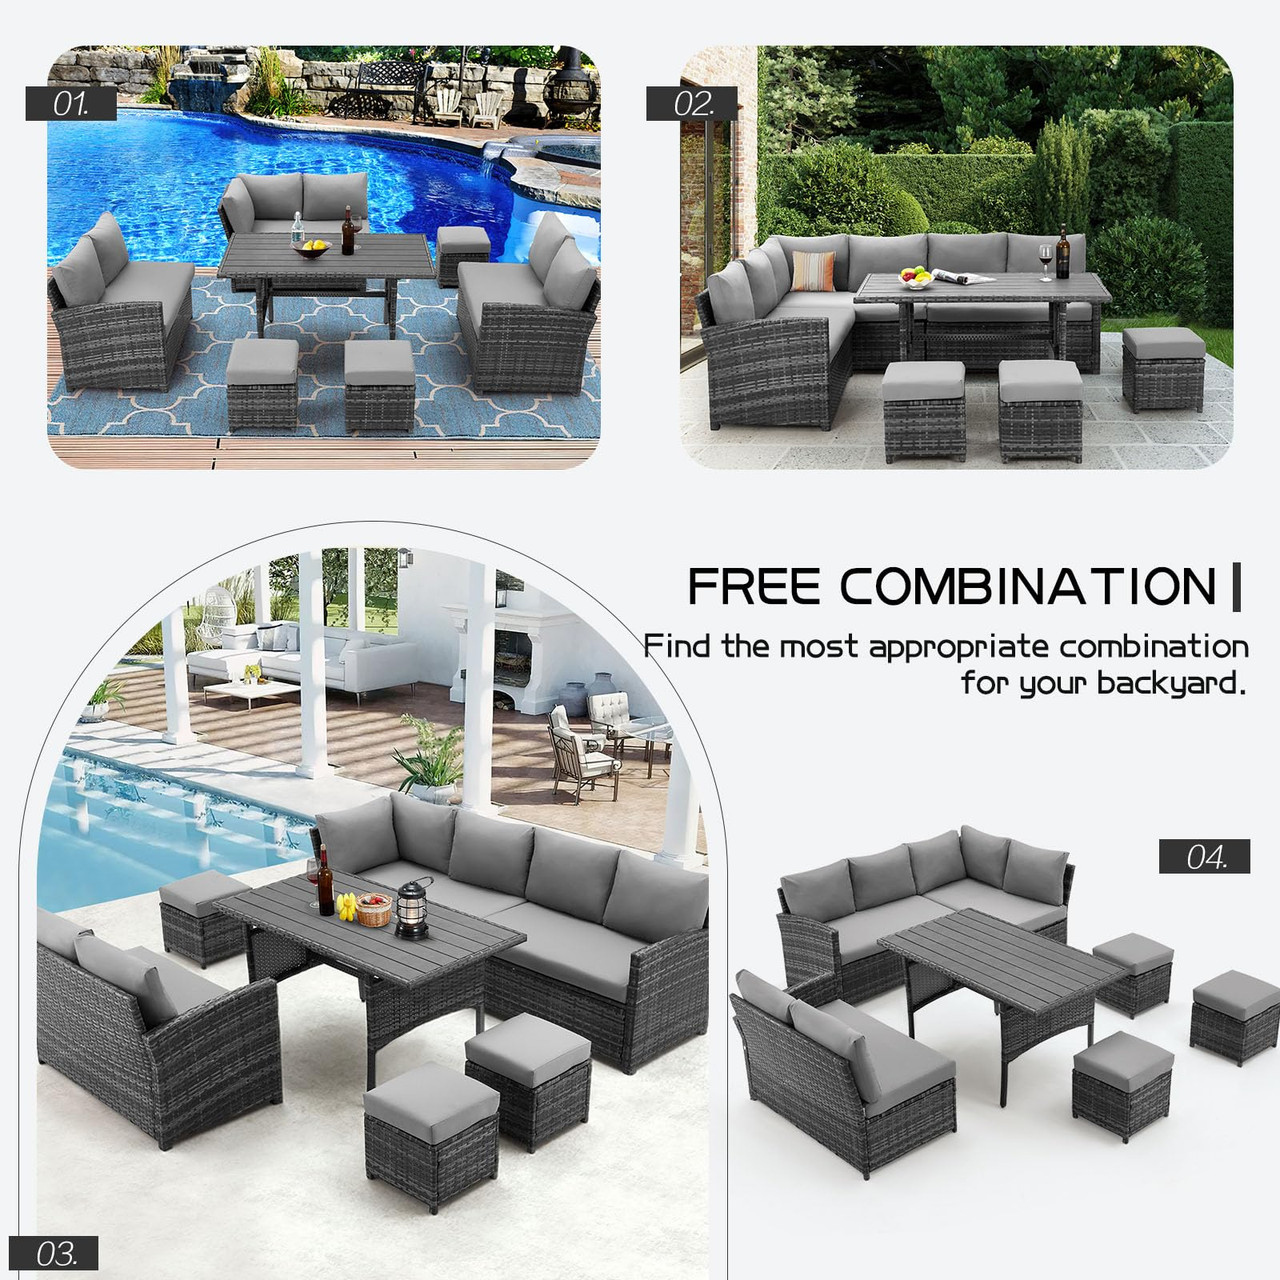 7-Piece Outdoor All-Weather Rattan Wicker Sectional Sofa Set product image